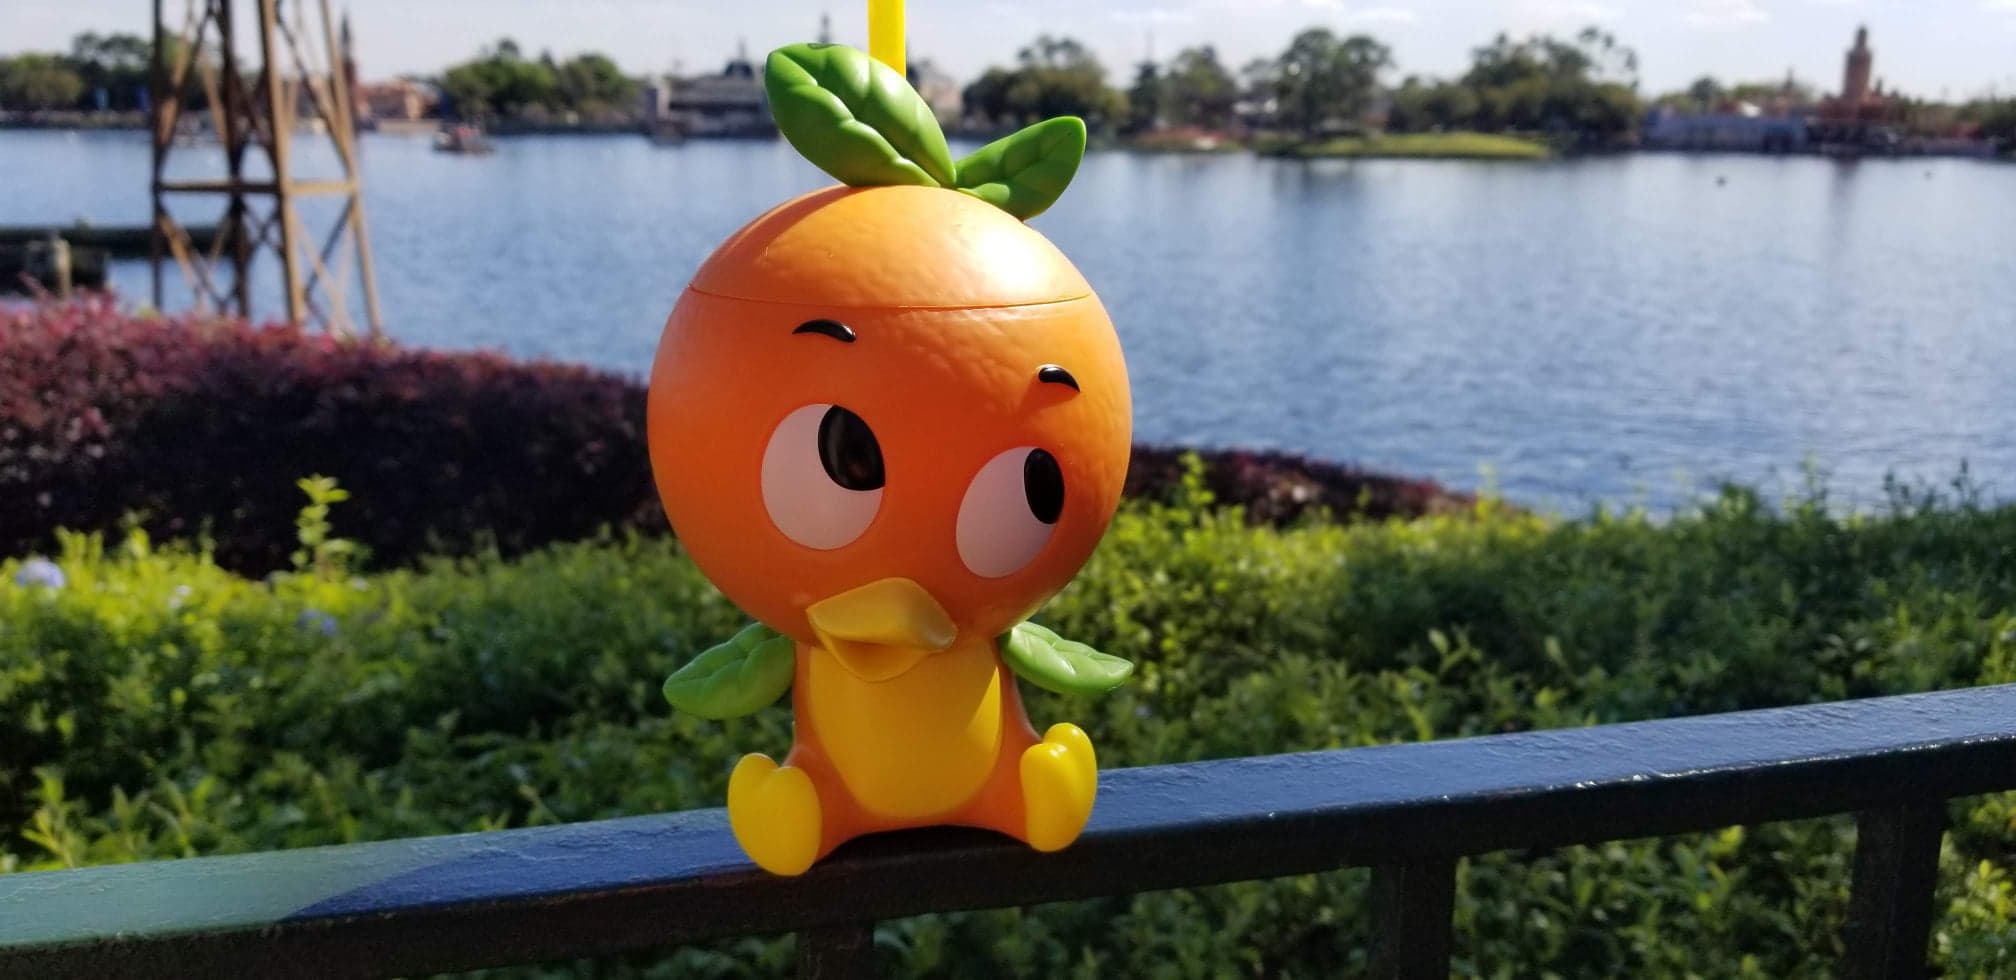 Orange Bird Sipper Cup back in stock at Epcot